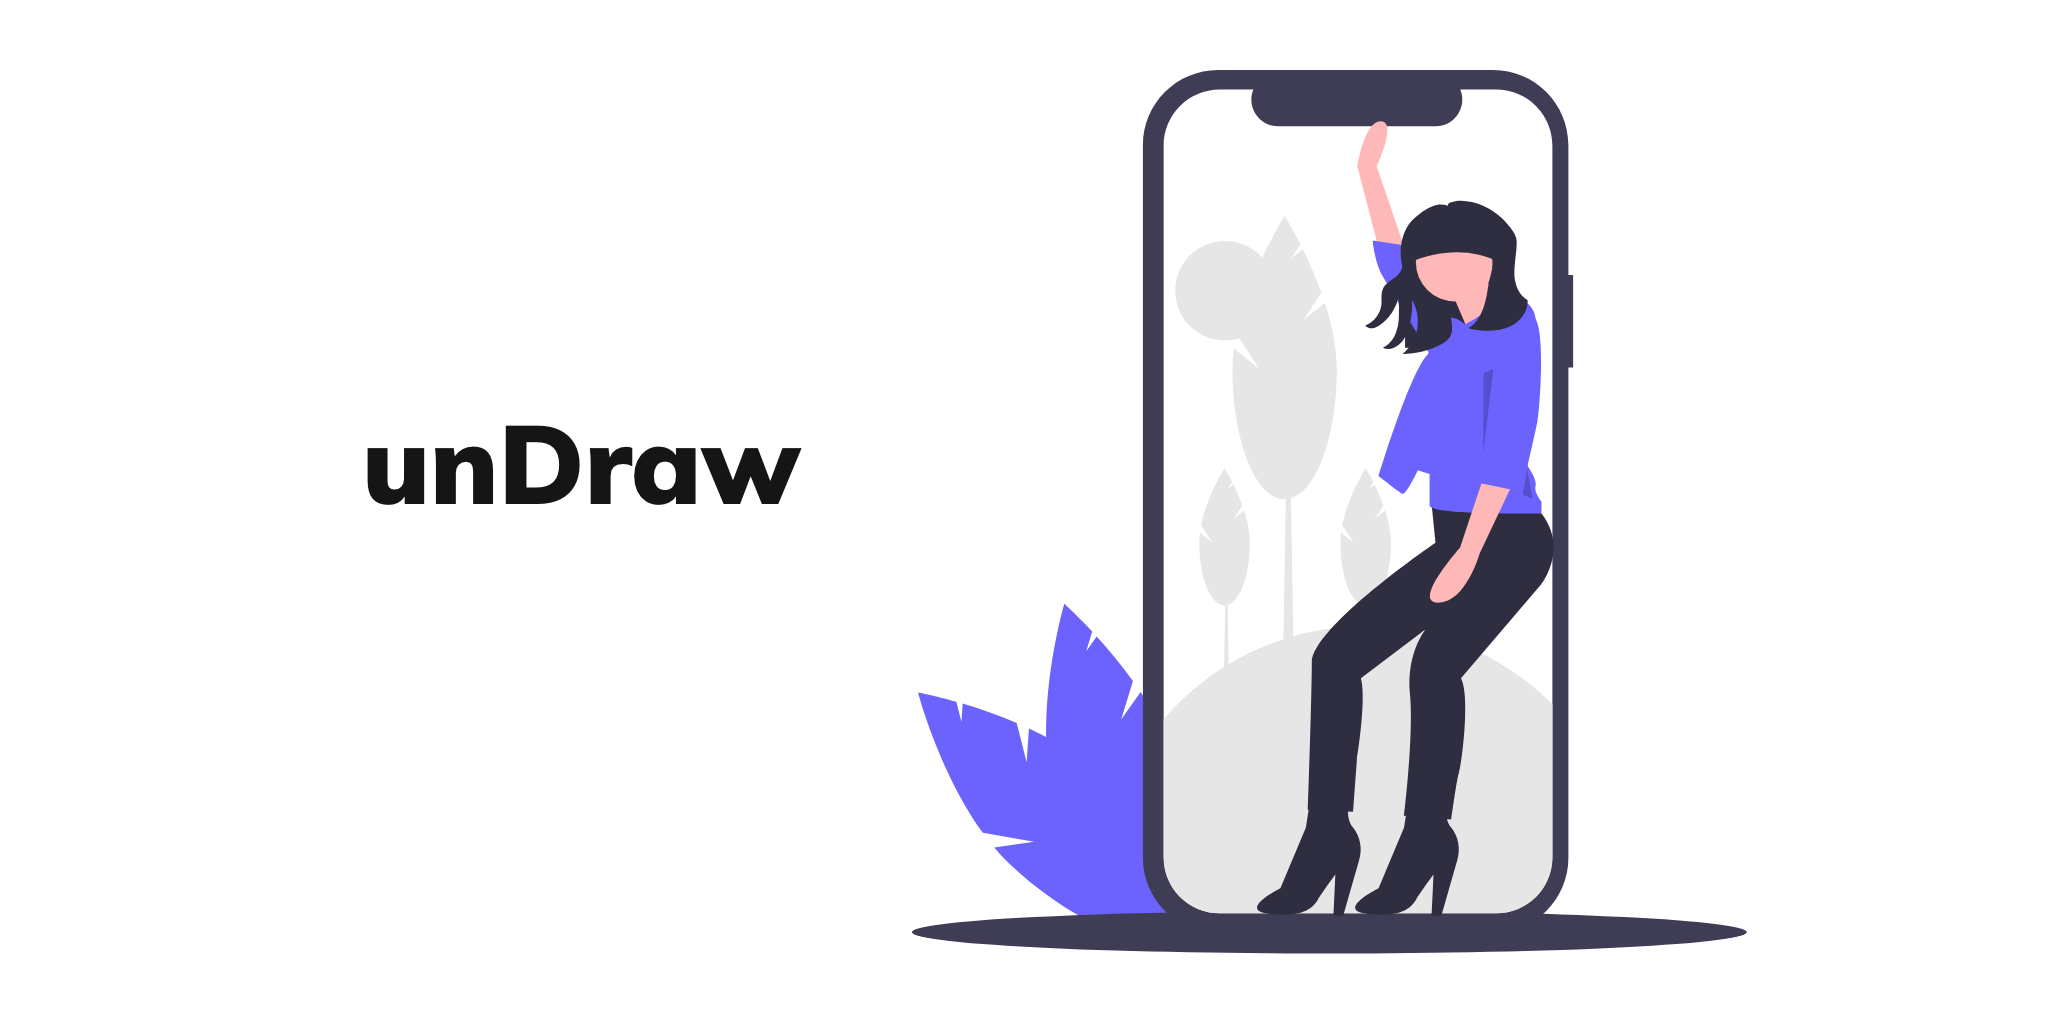 Undraw Open Source Illustrations For Any Idea